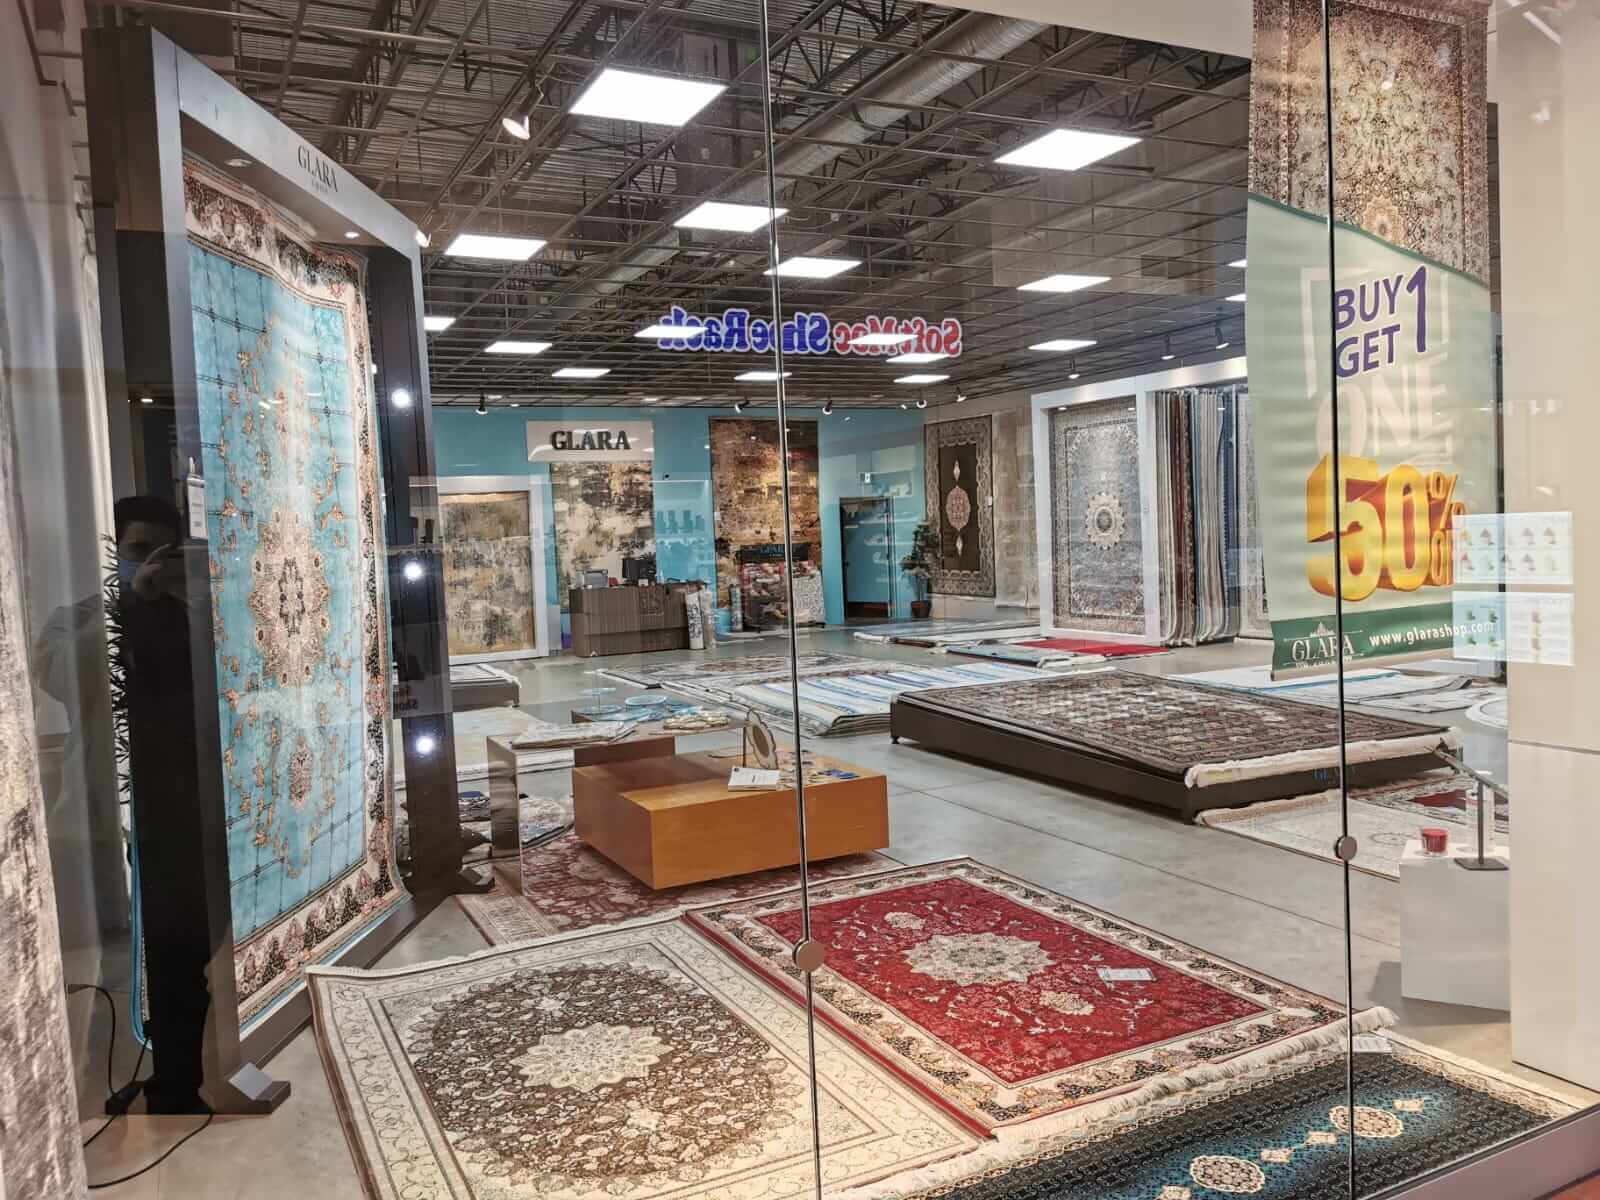 Why Do the Prices of Rugs Vary So Much?